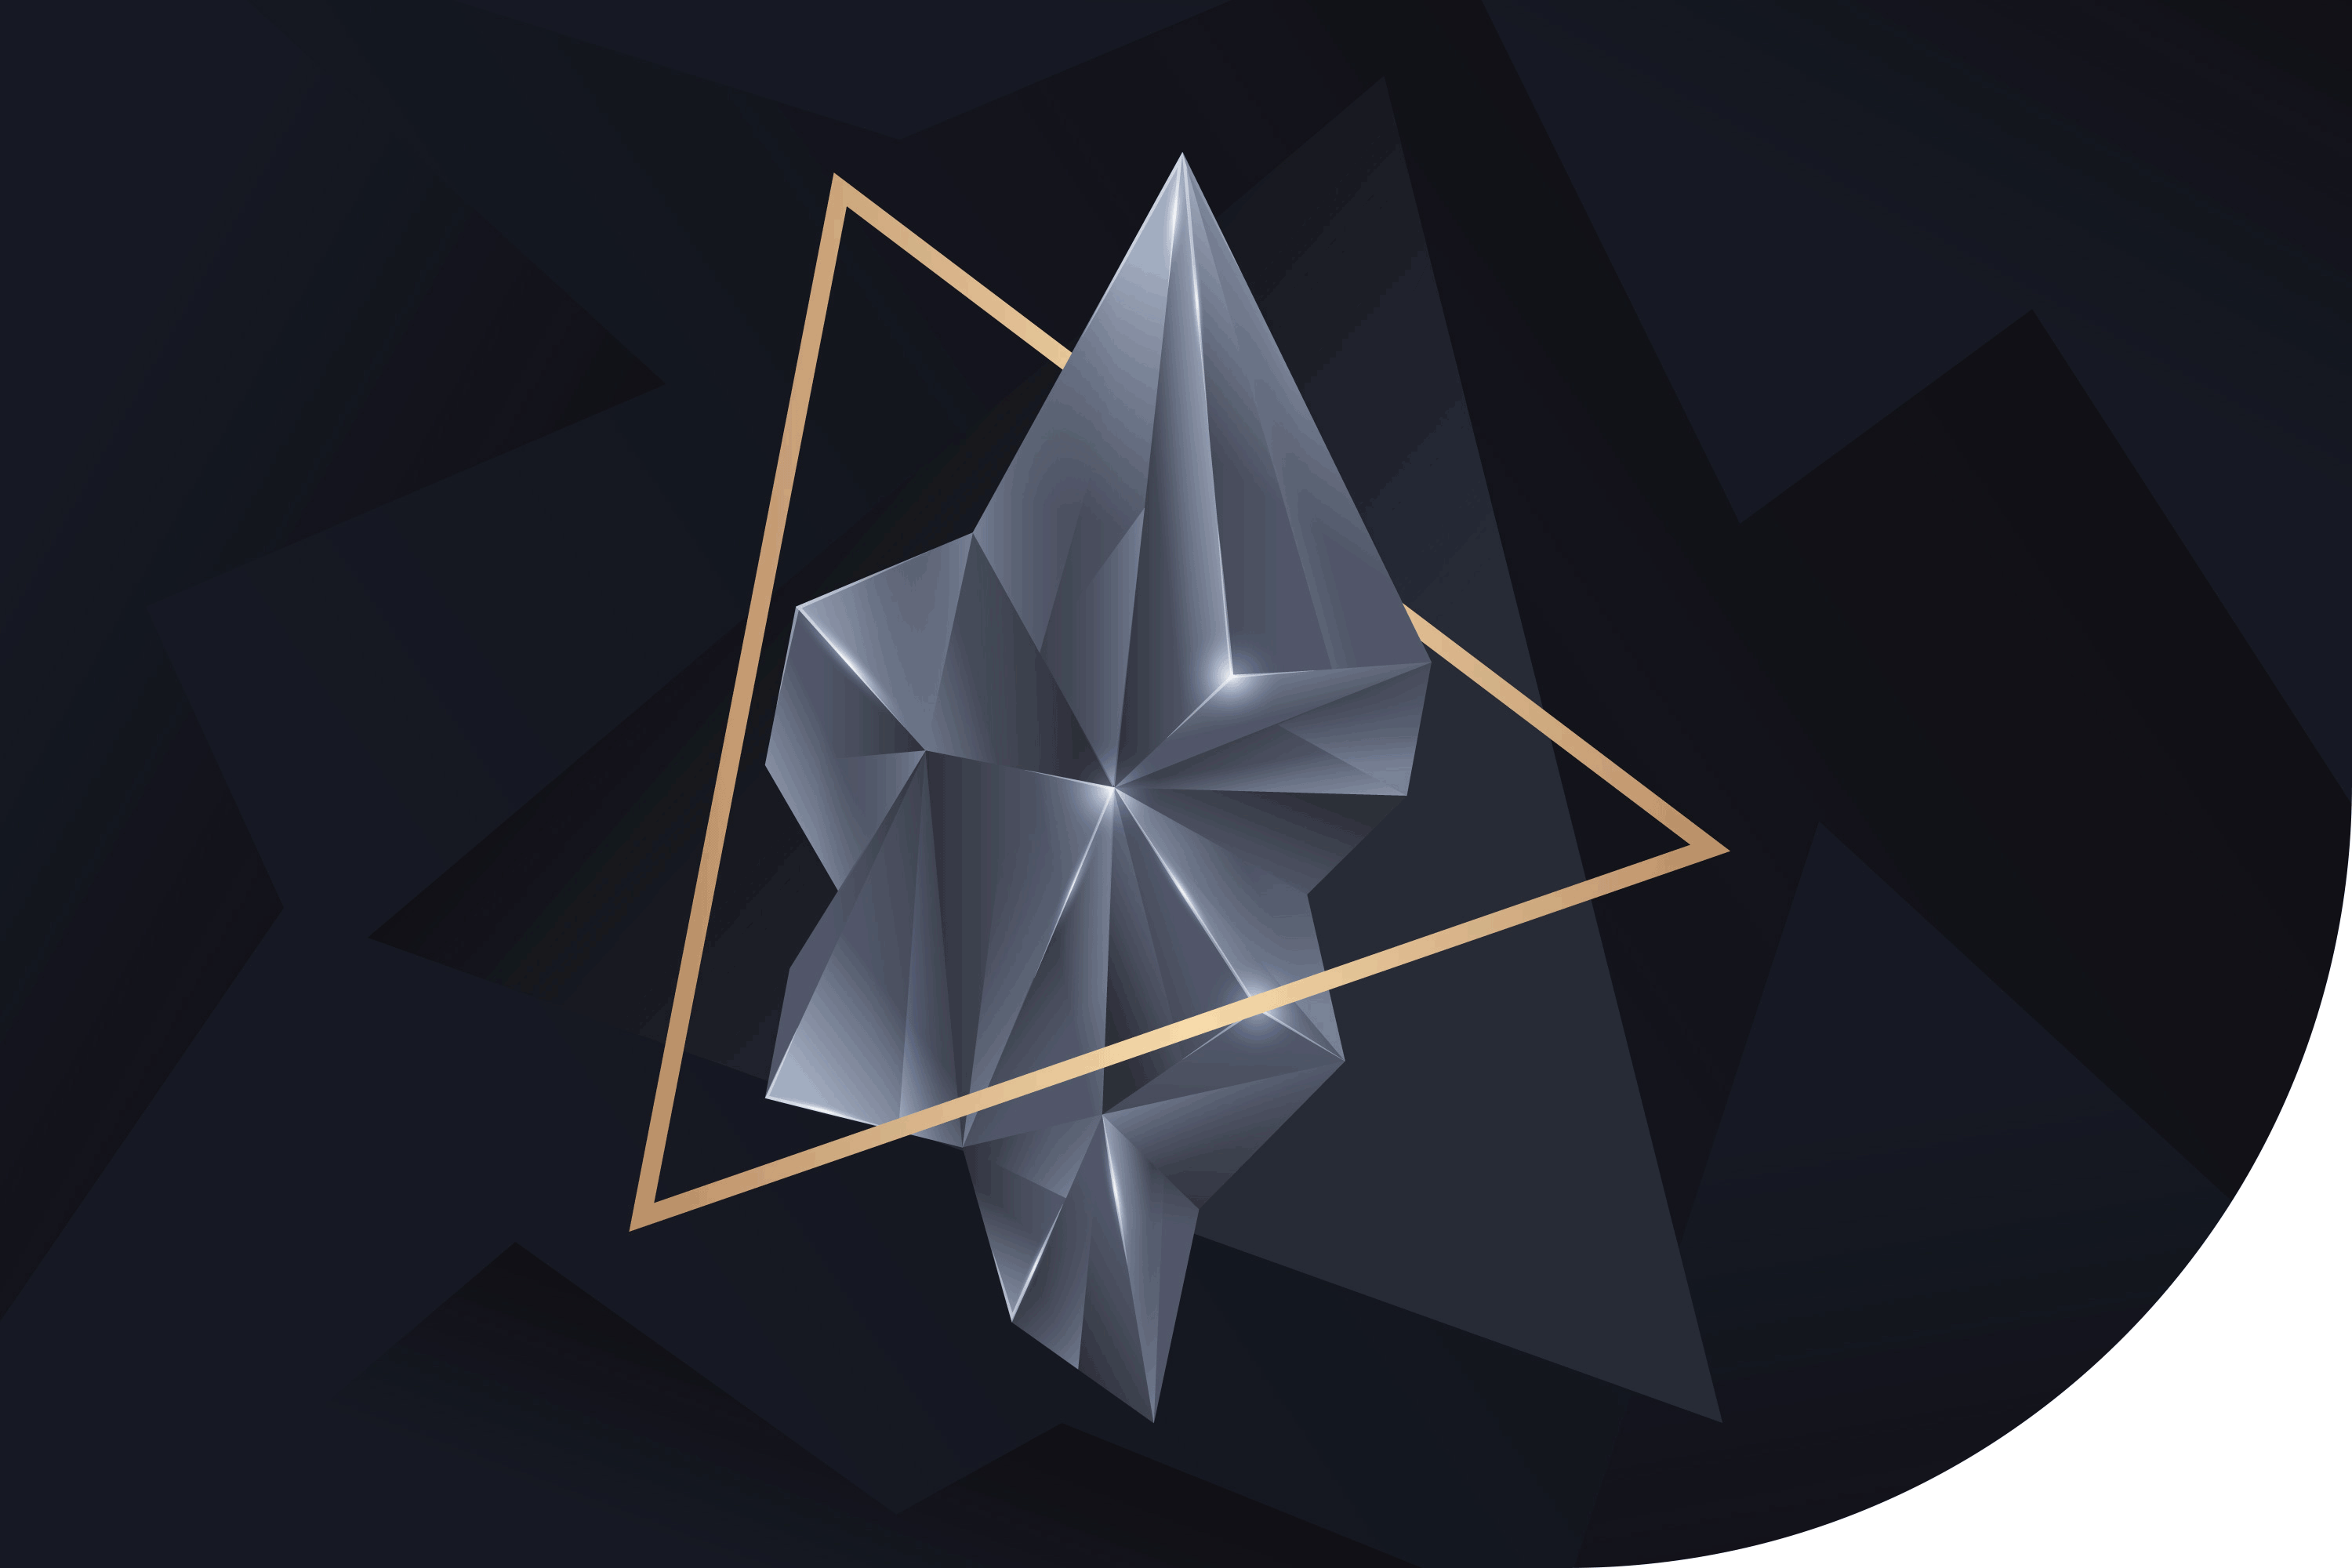 3D geometric art on a dark background featuring a translucent crystal-like structure encased within two intersecting golden triangles.